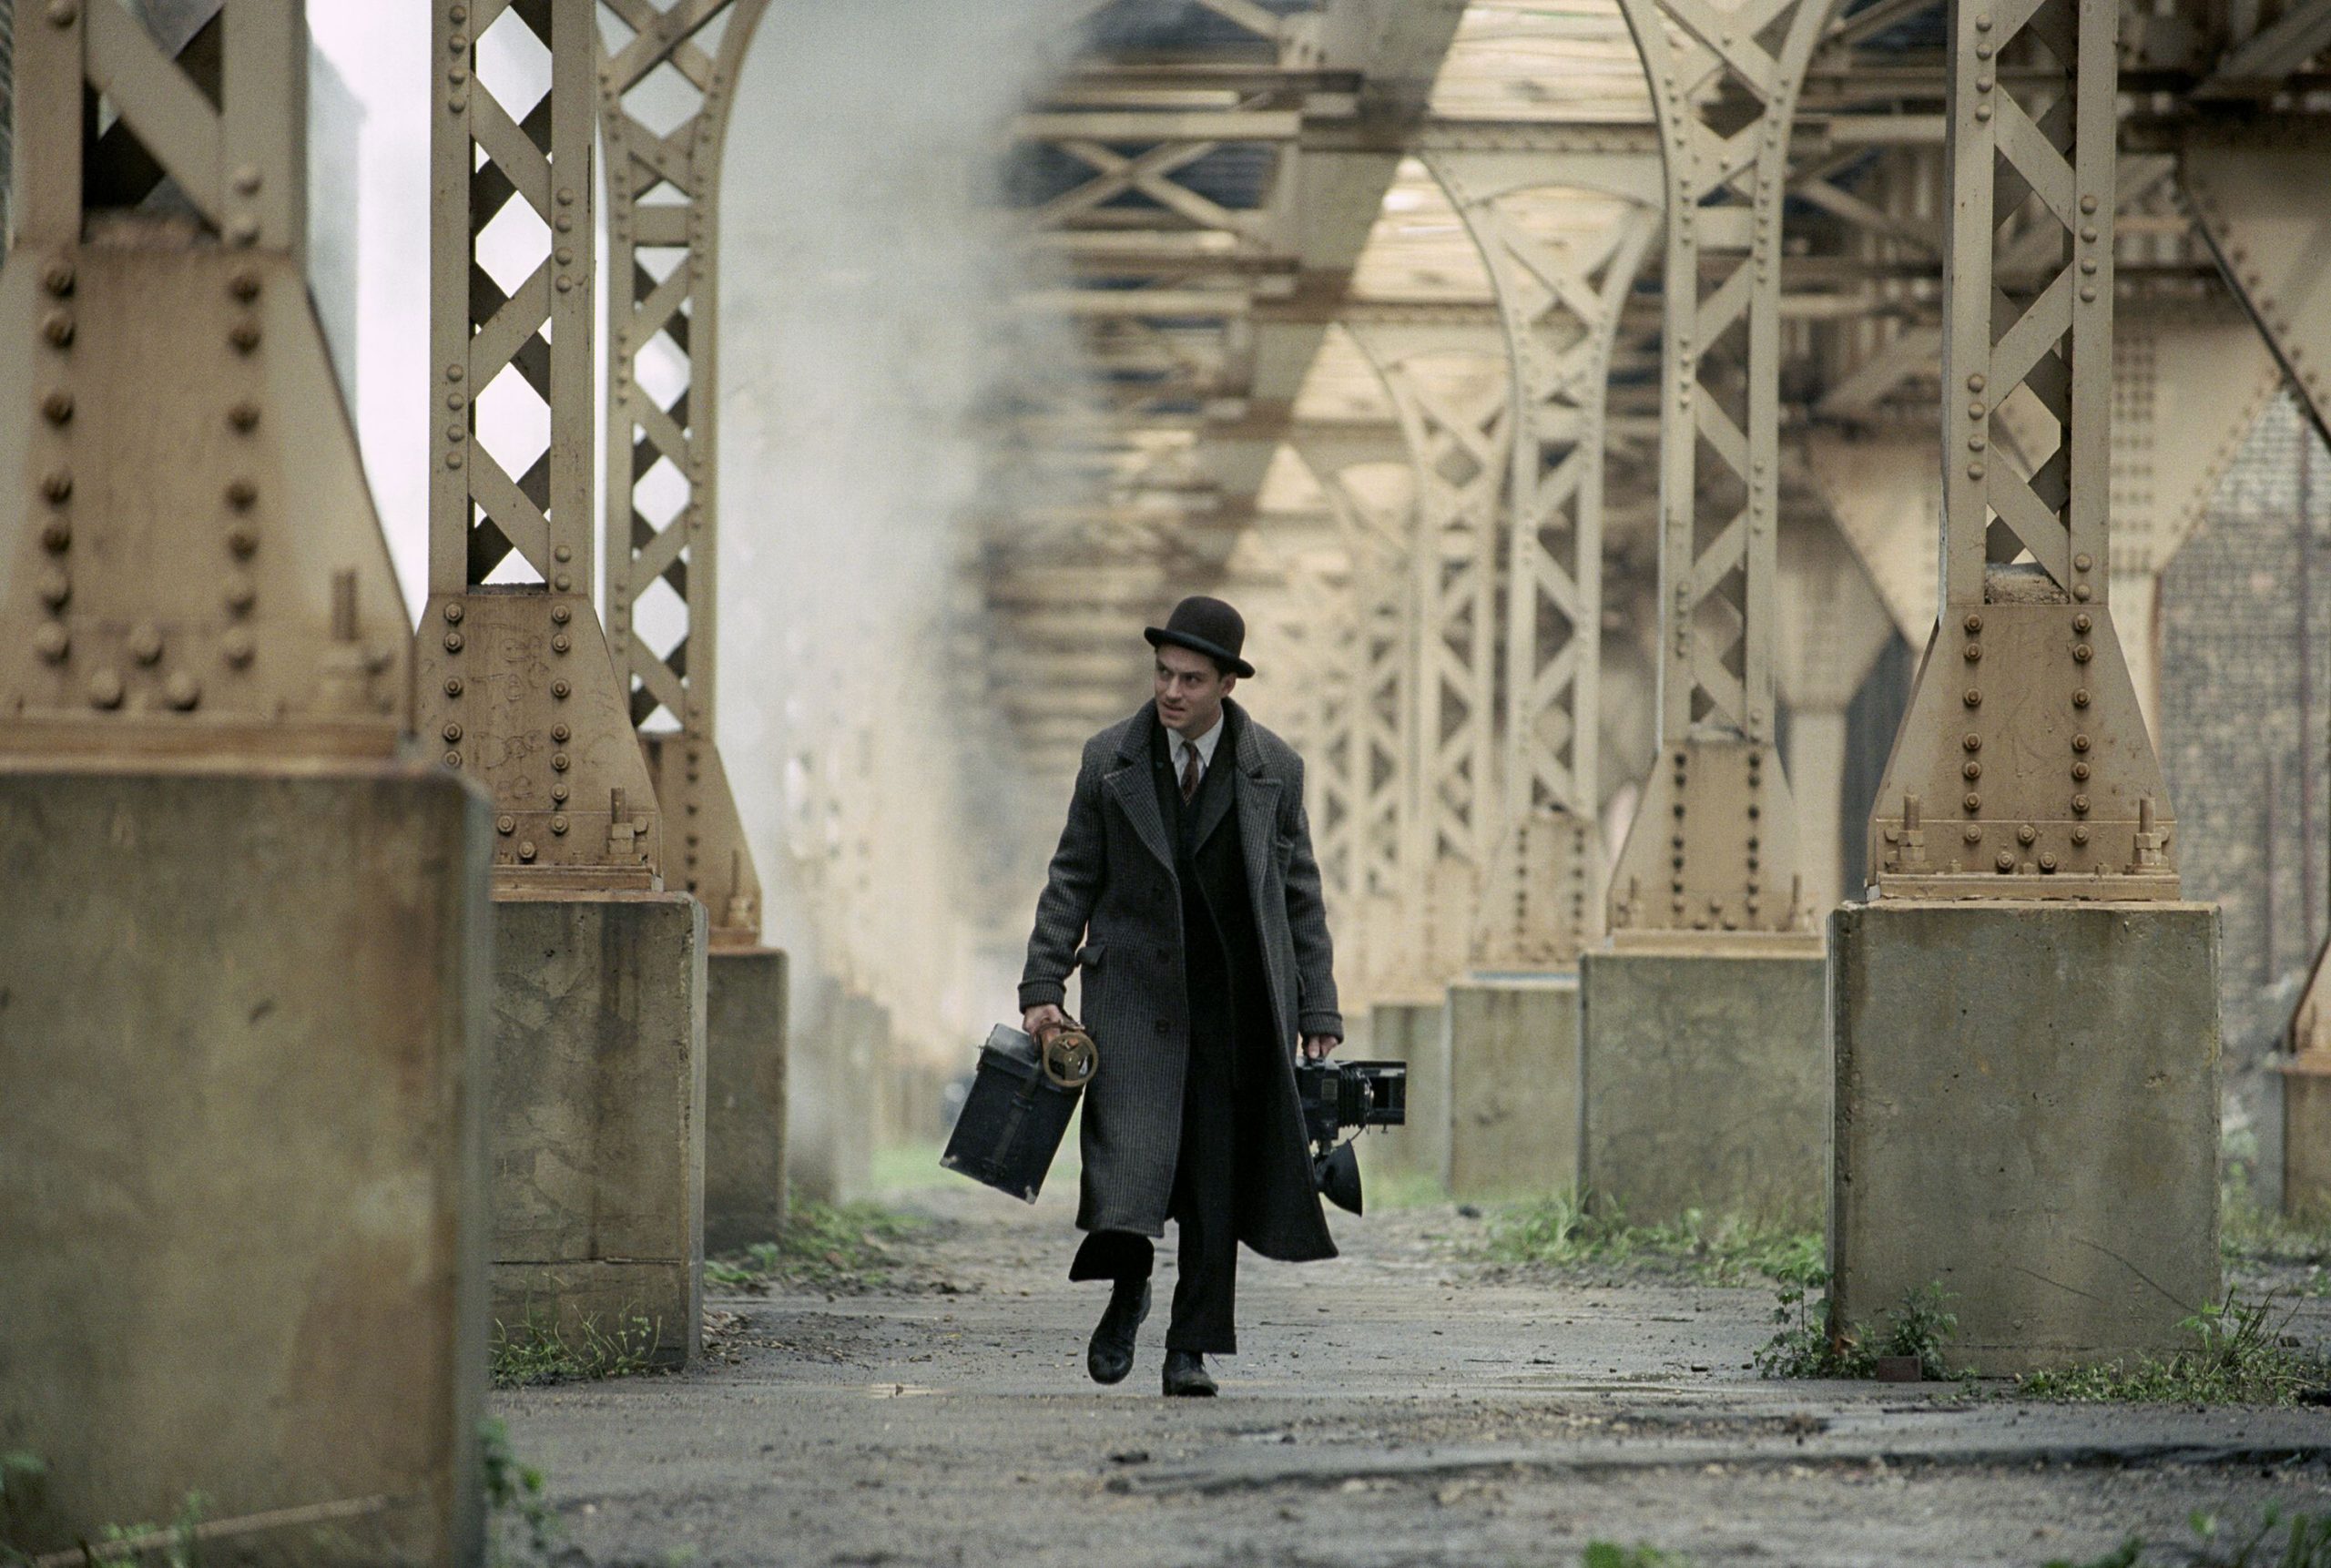 Road to perdition (2002)